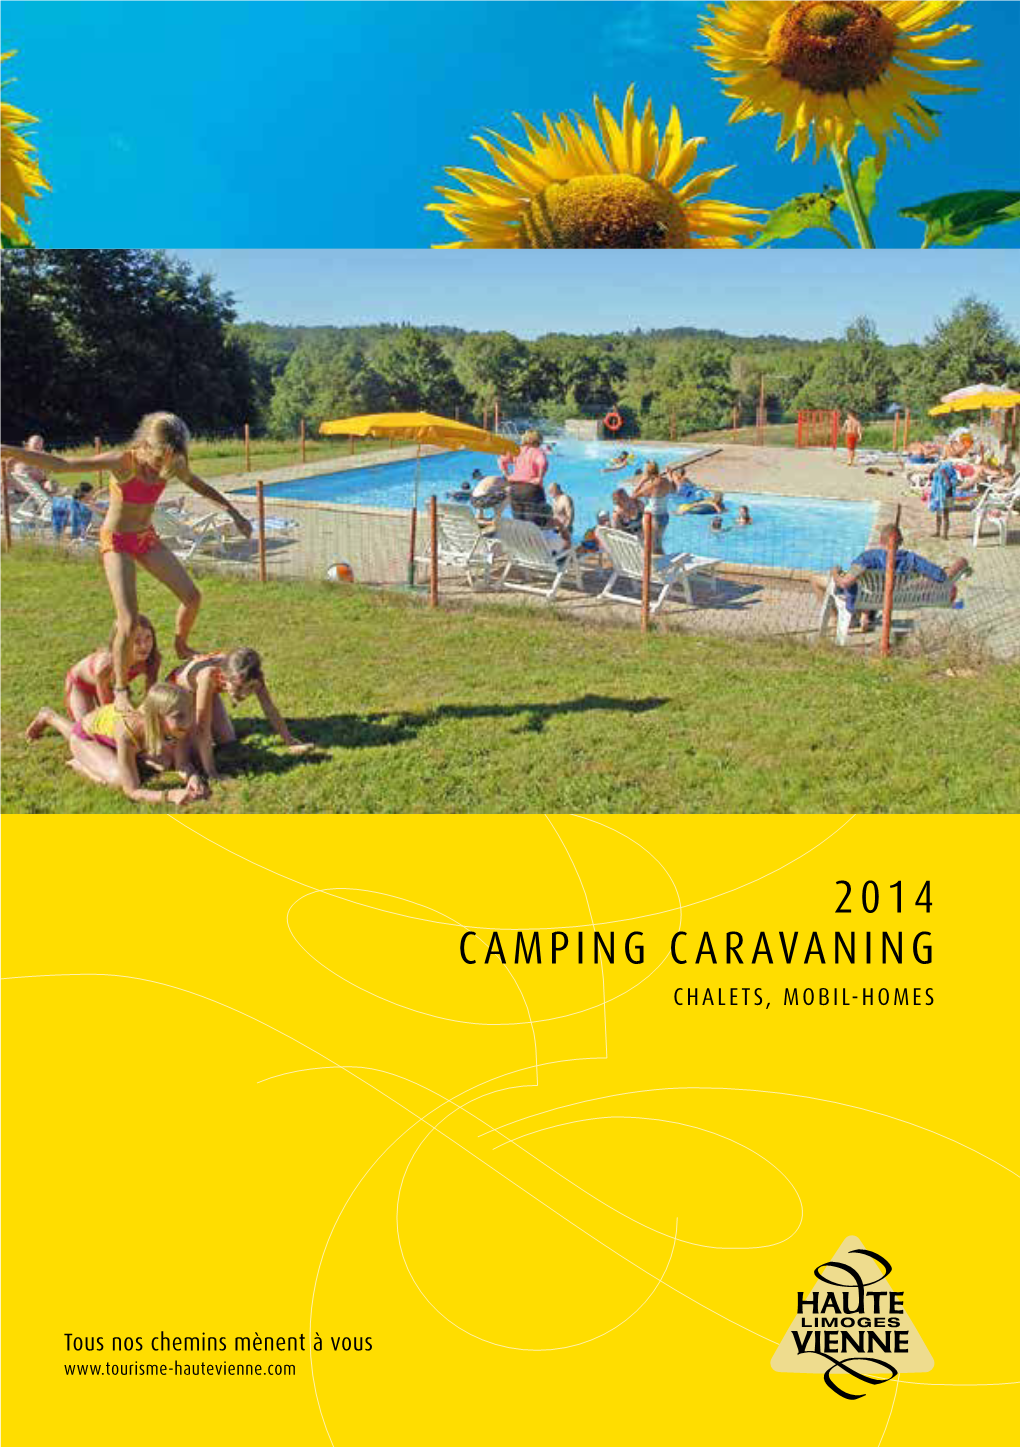 2014 Camping Caravaning Chalets, Mobil-Homes